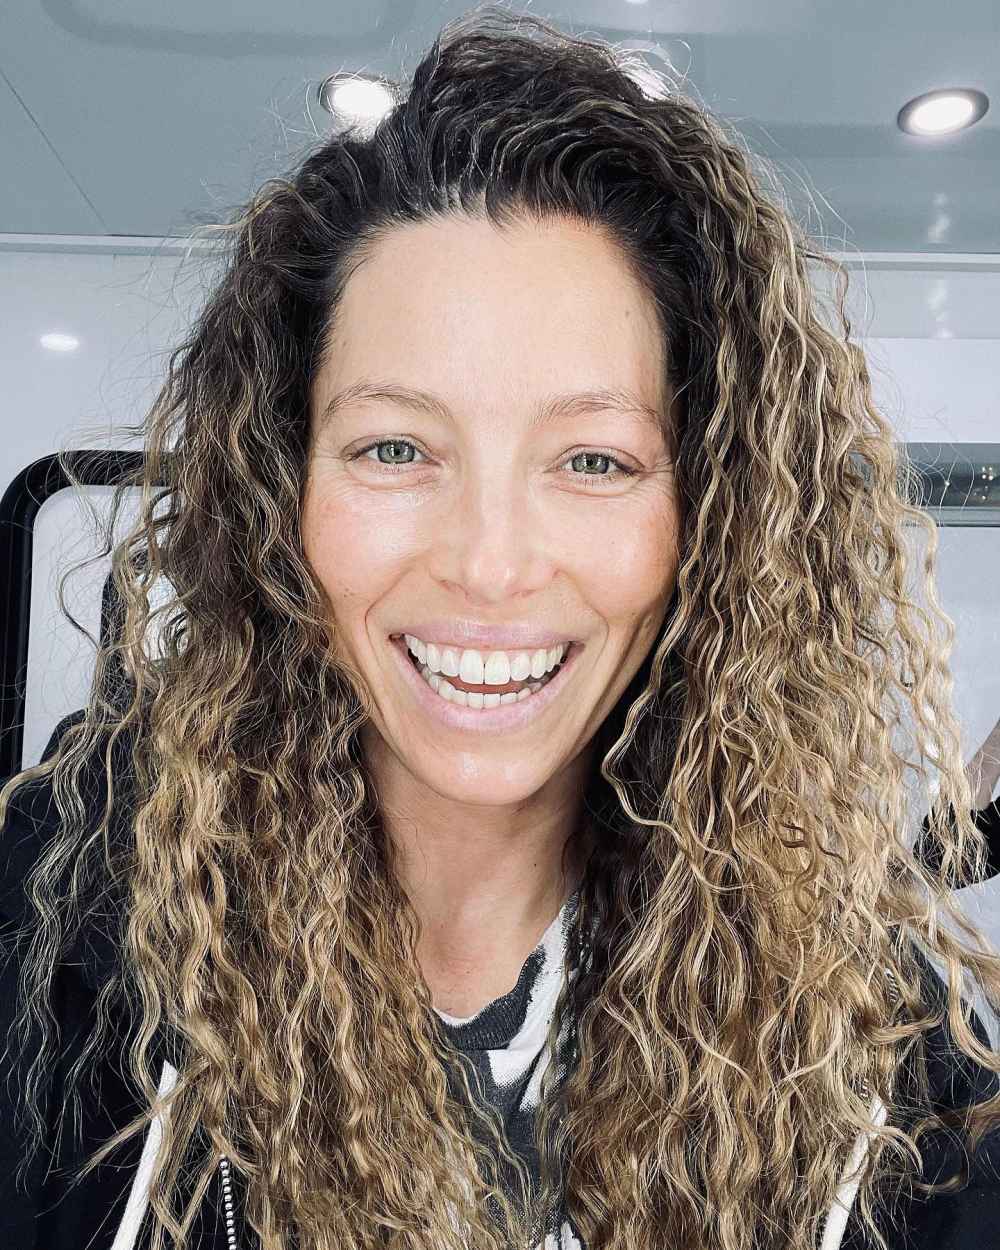 Jessica Biel Just Revealed Her Natural Curly Hair and Fans Are Losing It